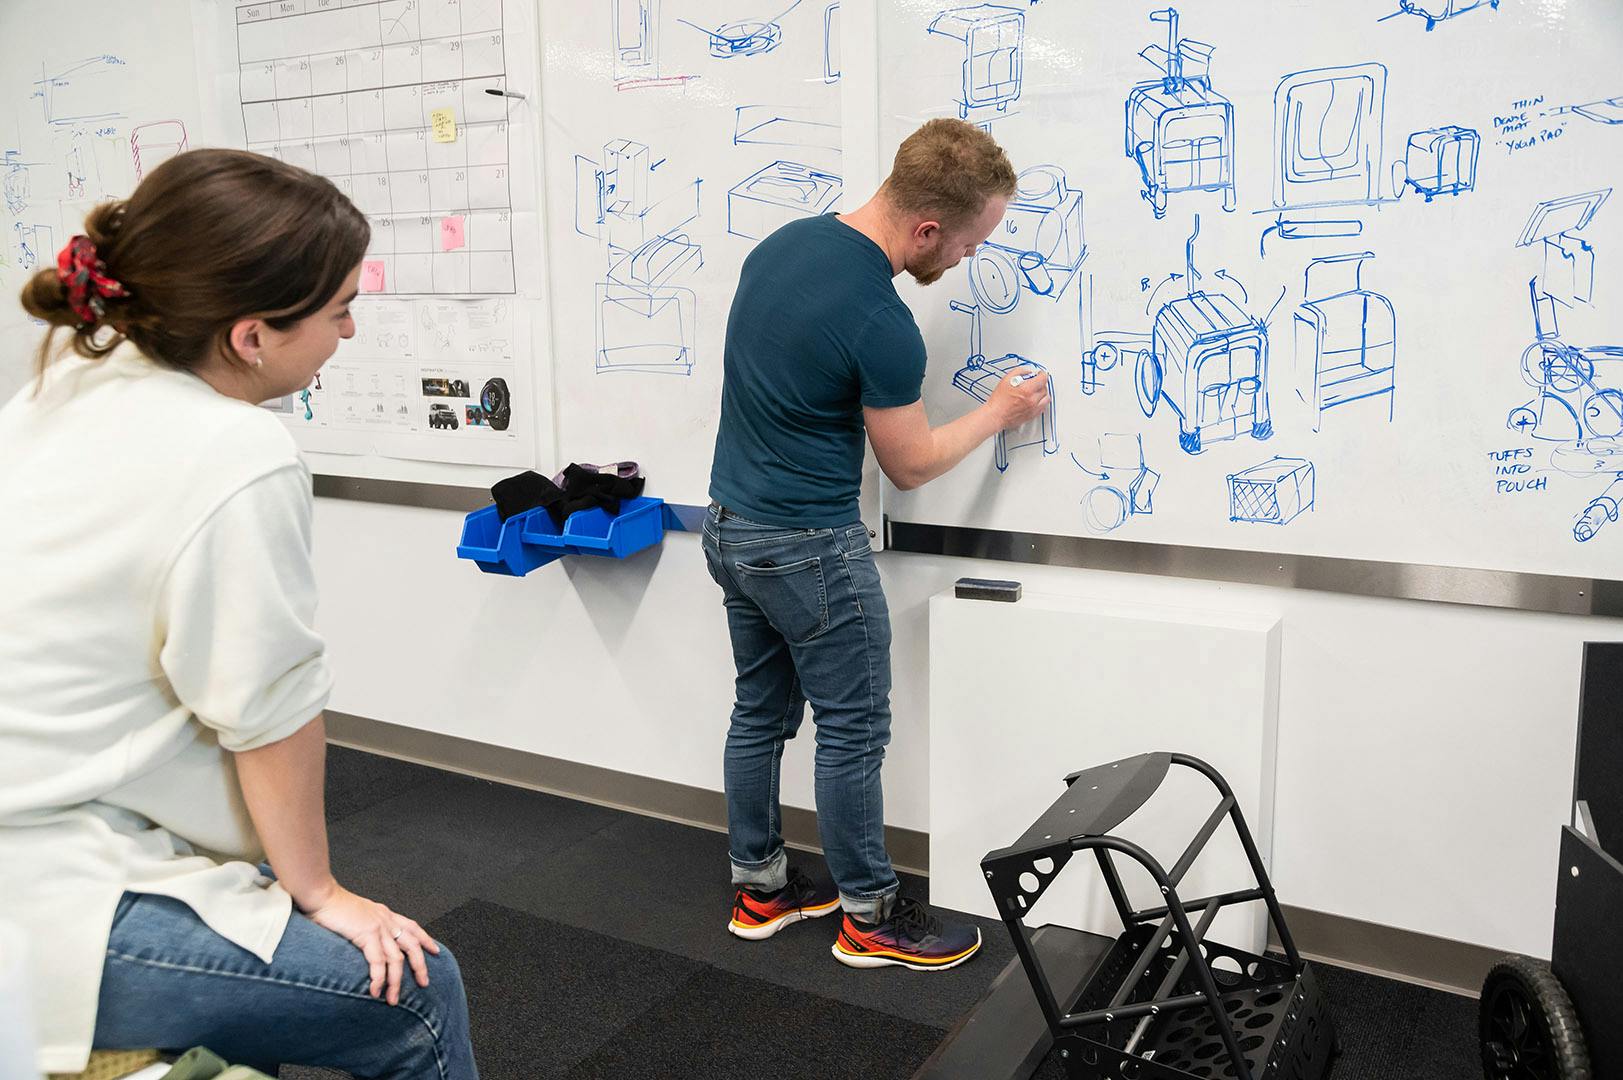 Industrial Designers sketching ideas on a white board